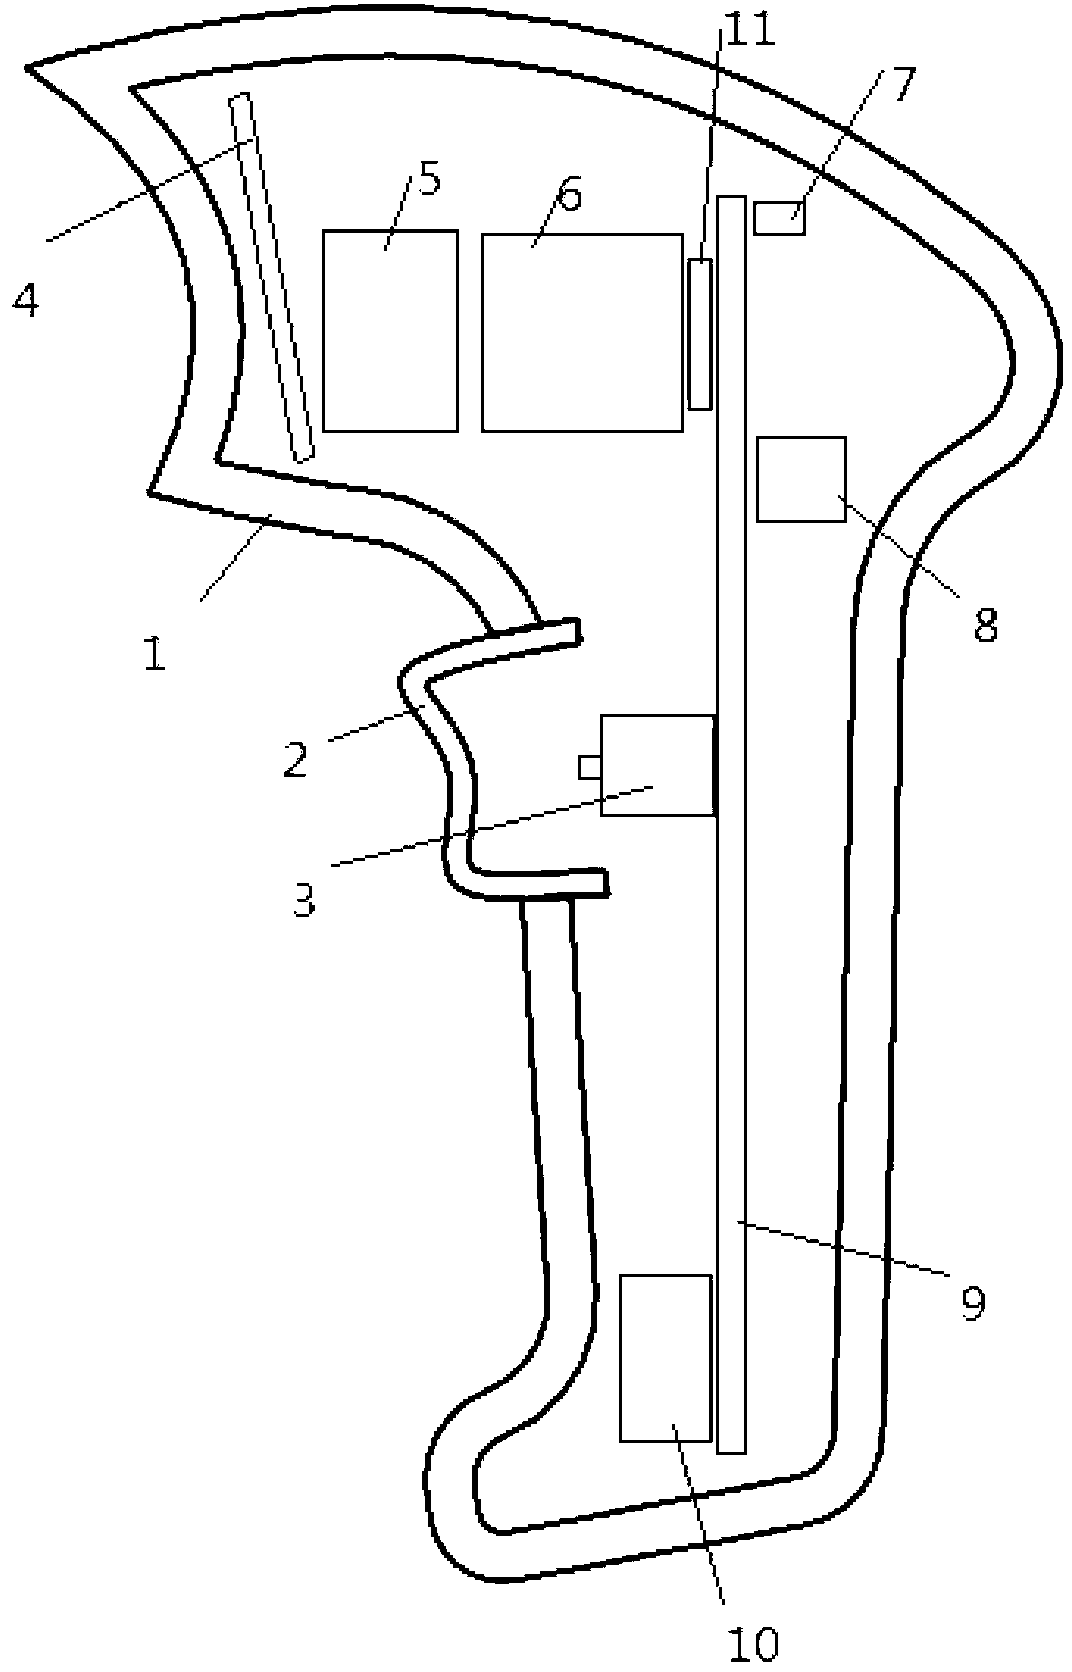 Bar-code scanner with dynamic multi-angle illuminating system and bar-code scanning method thereof